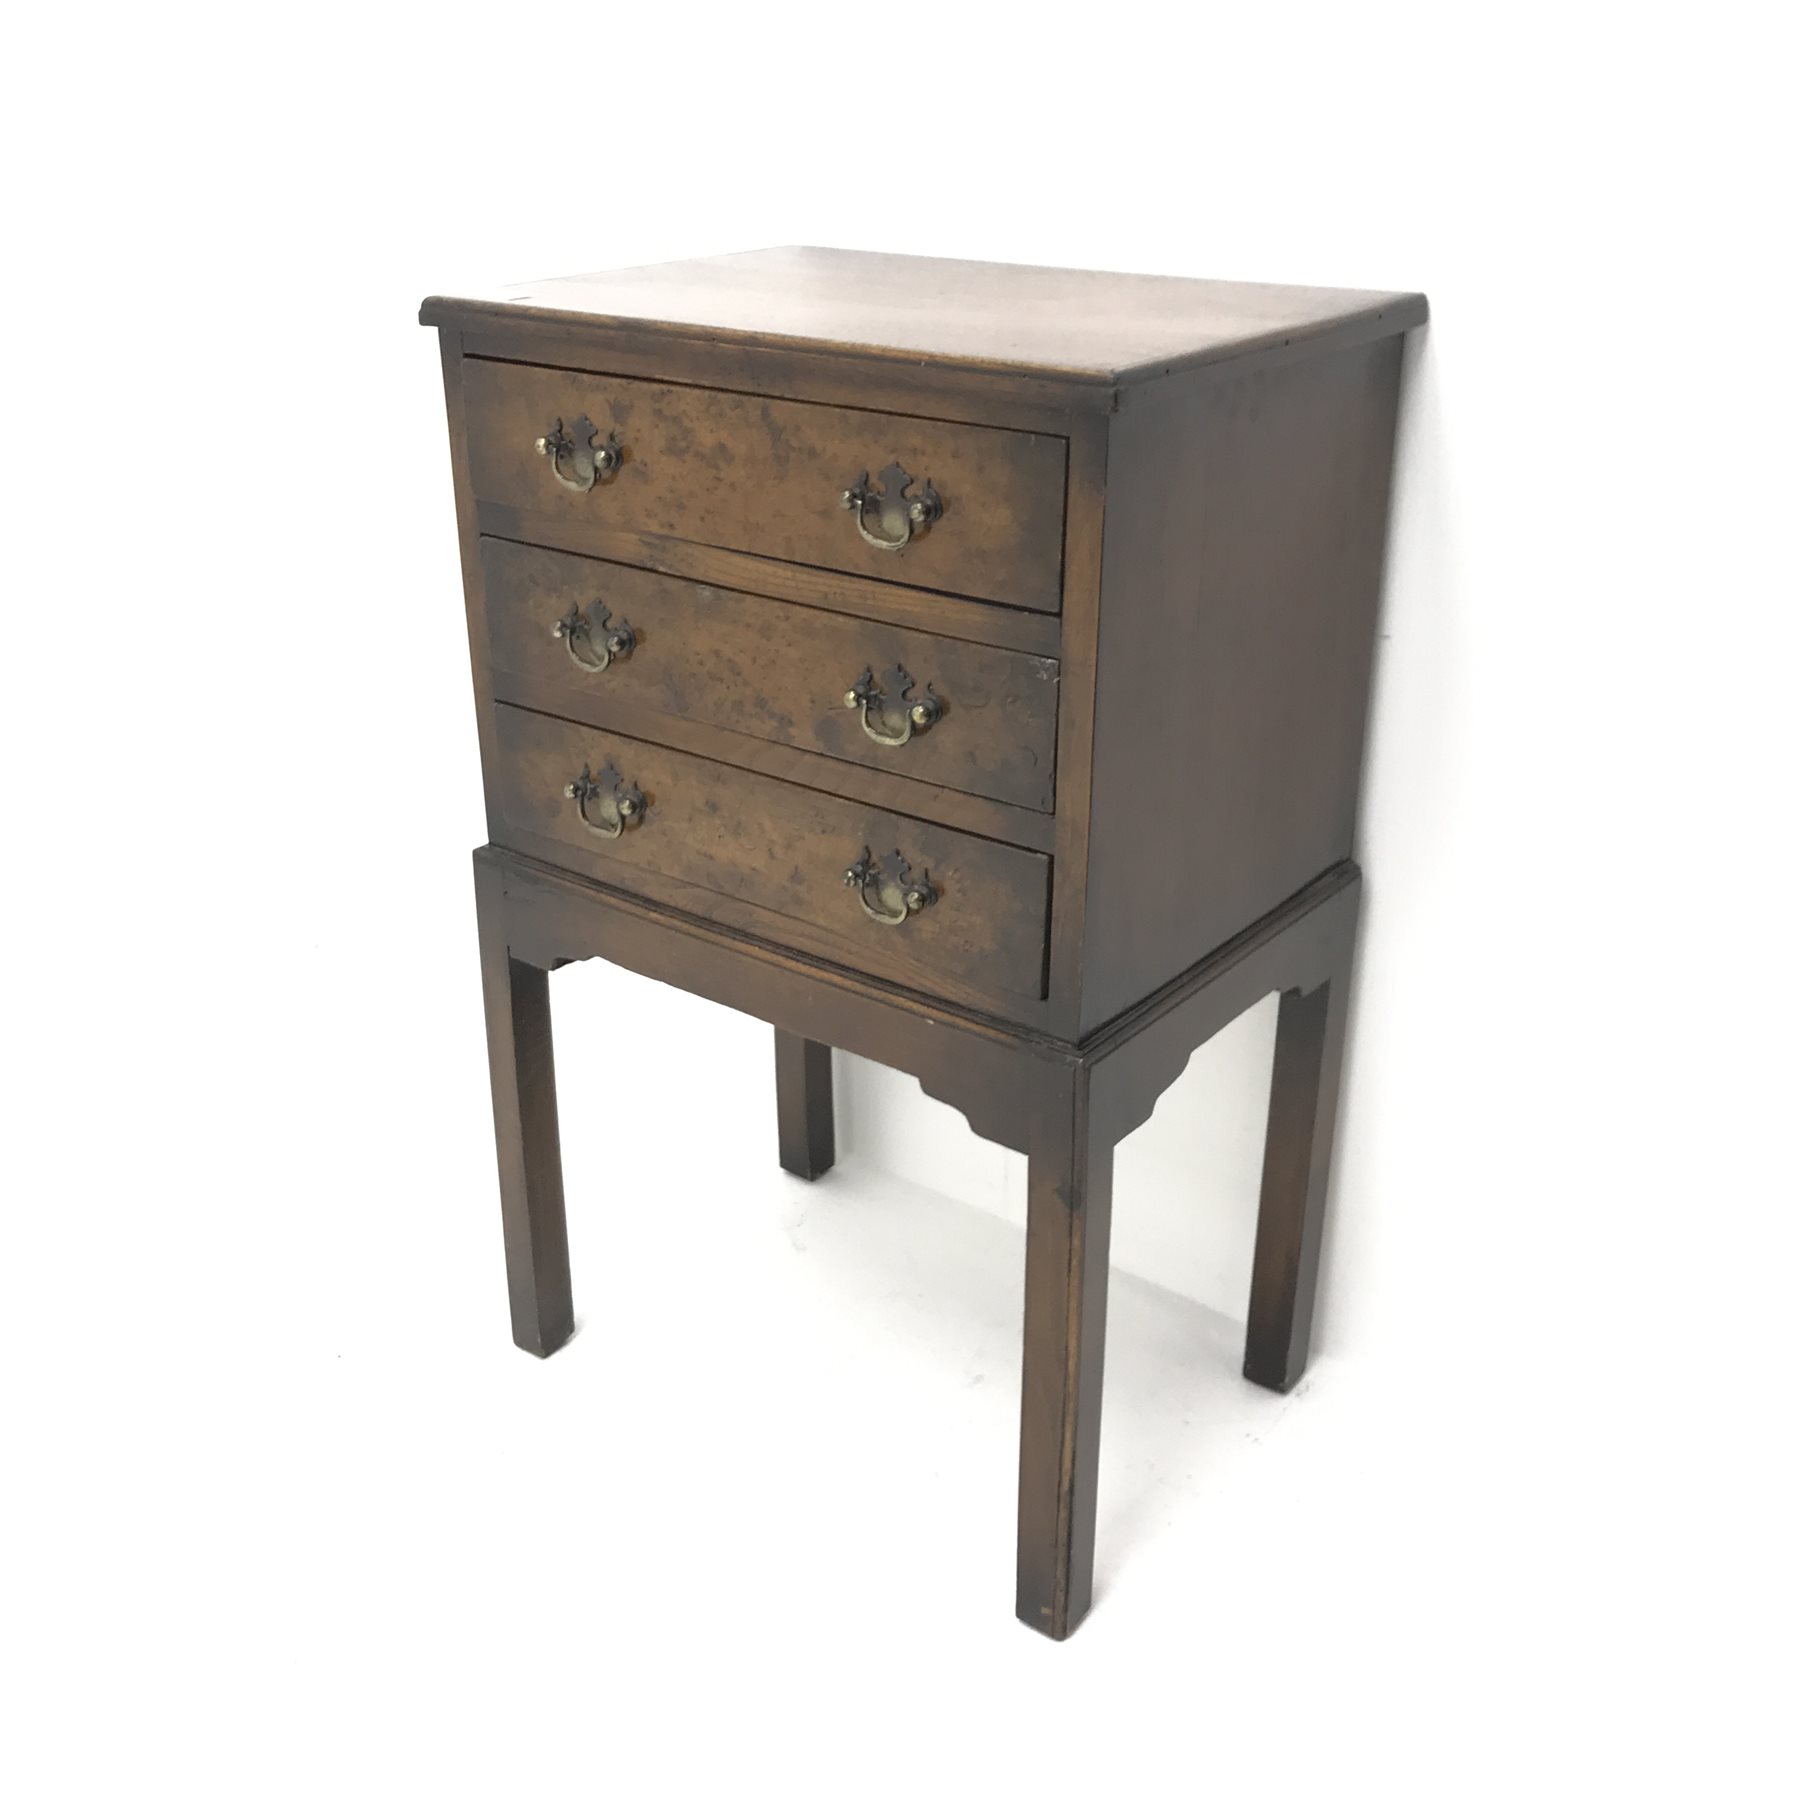 Small early 20th century mahogany chest on stand, three walnut burr veneered drawers, square suppor